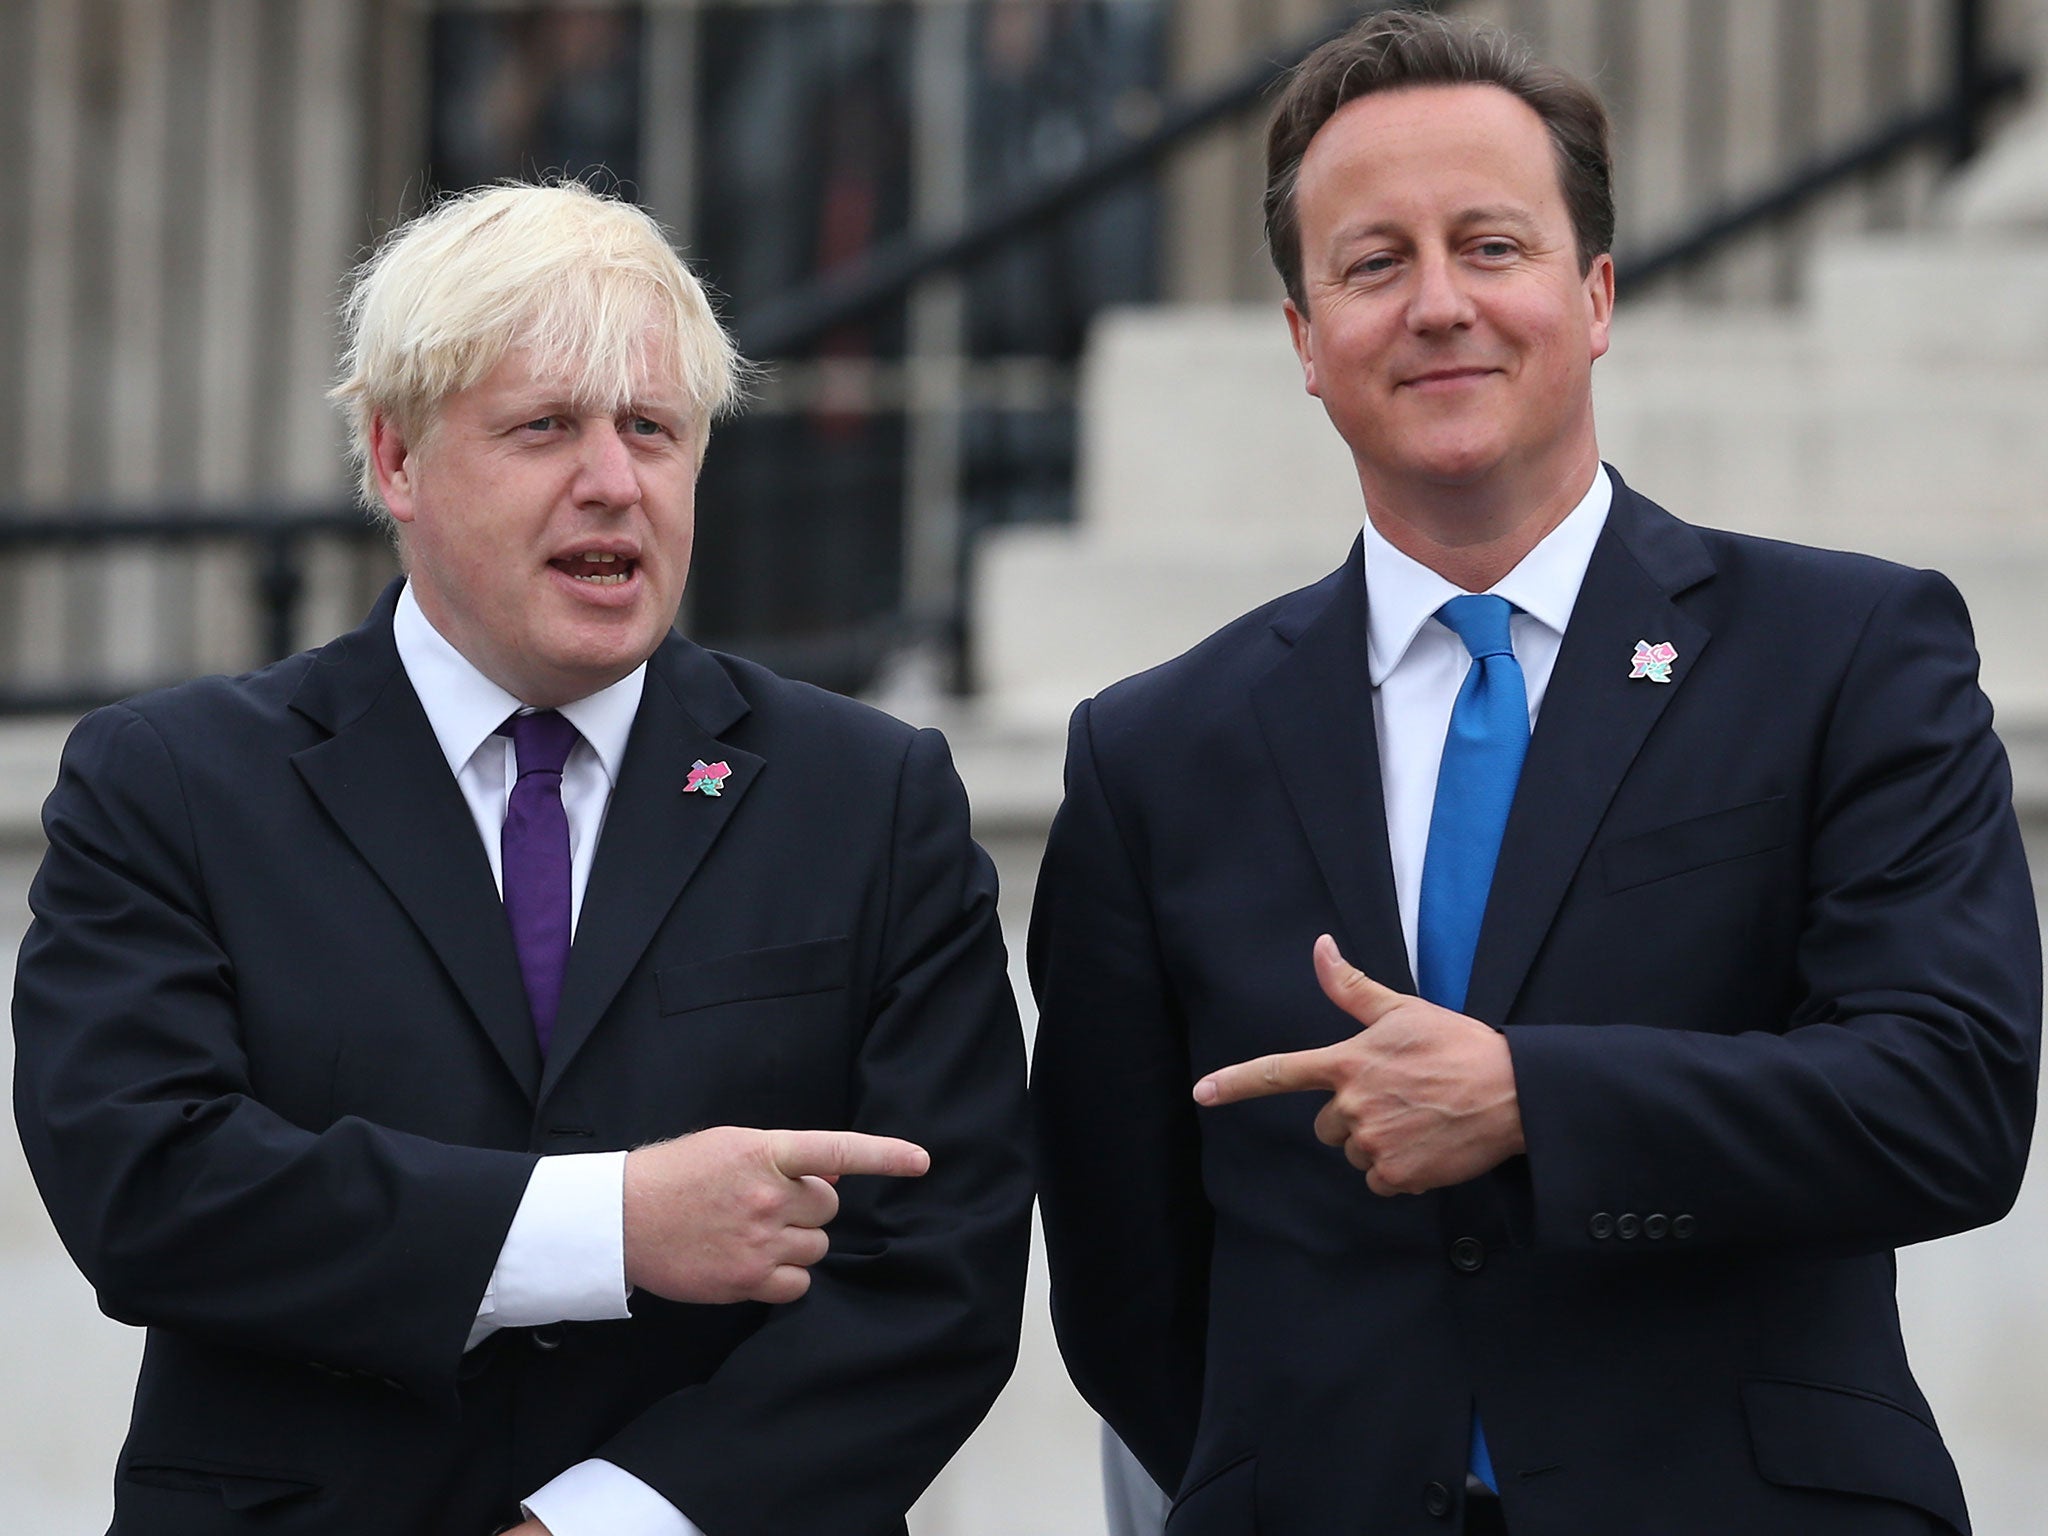 David Cameron said he still sees Boris Johnson as a 'substantial' figure in the Conservative Party